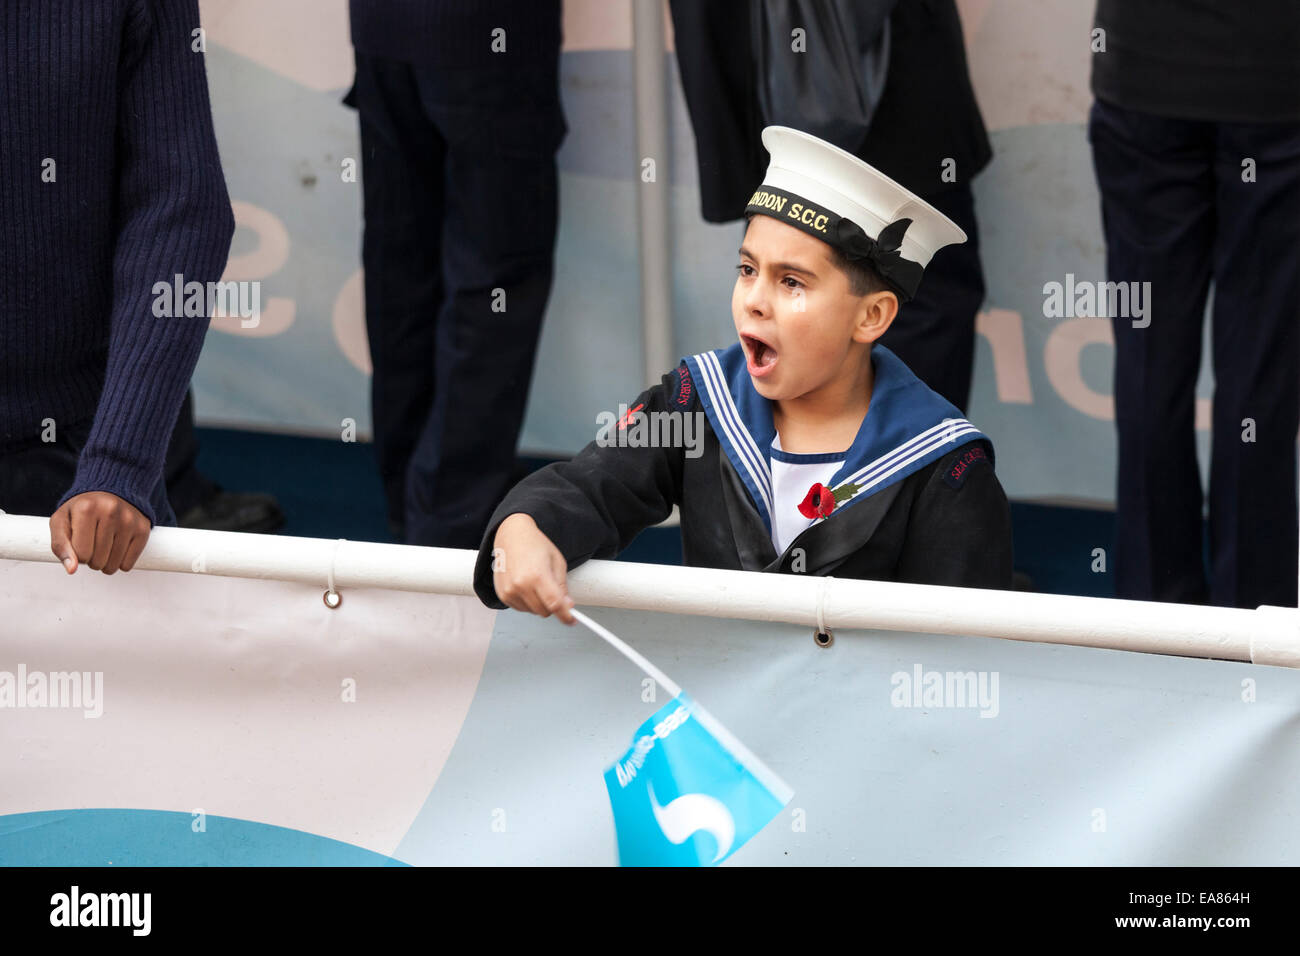 8th November 2014, Lord Mayor's Show, City of London, London, UK. A young member of the London Area Sea Cadets Corps cheers on the public during the procession. The Lord Mayor's Show is the oldest civil procession in the world, it celebrates the start of a one-year term for the new Mayor of the City of London. Stock Photo